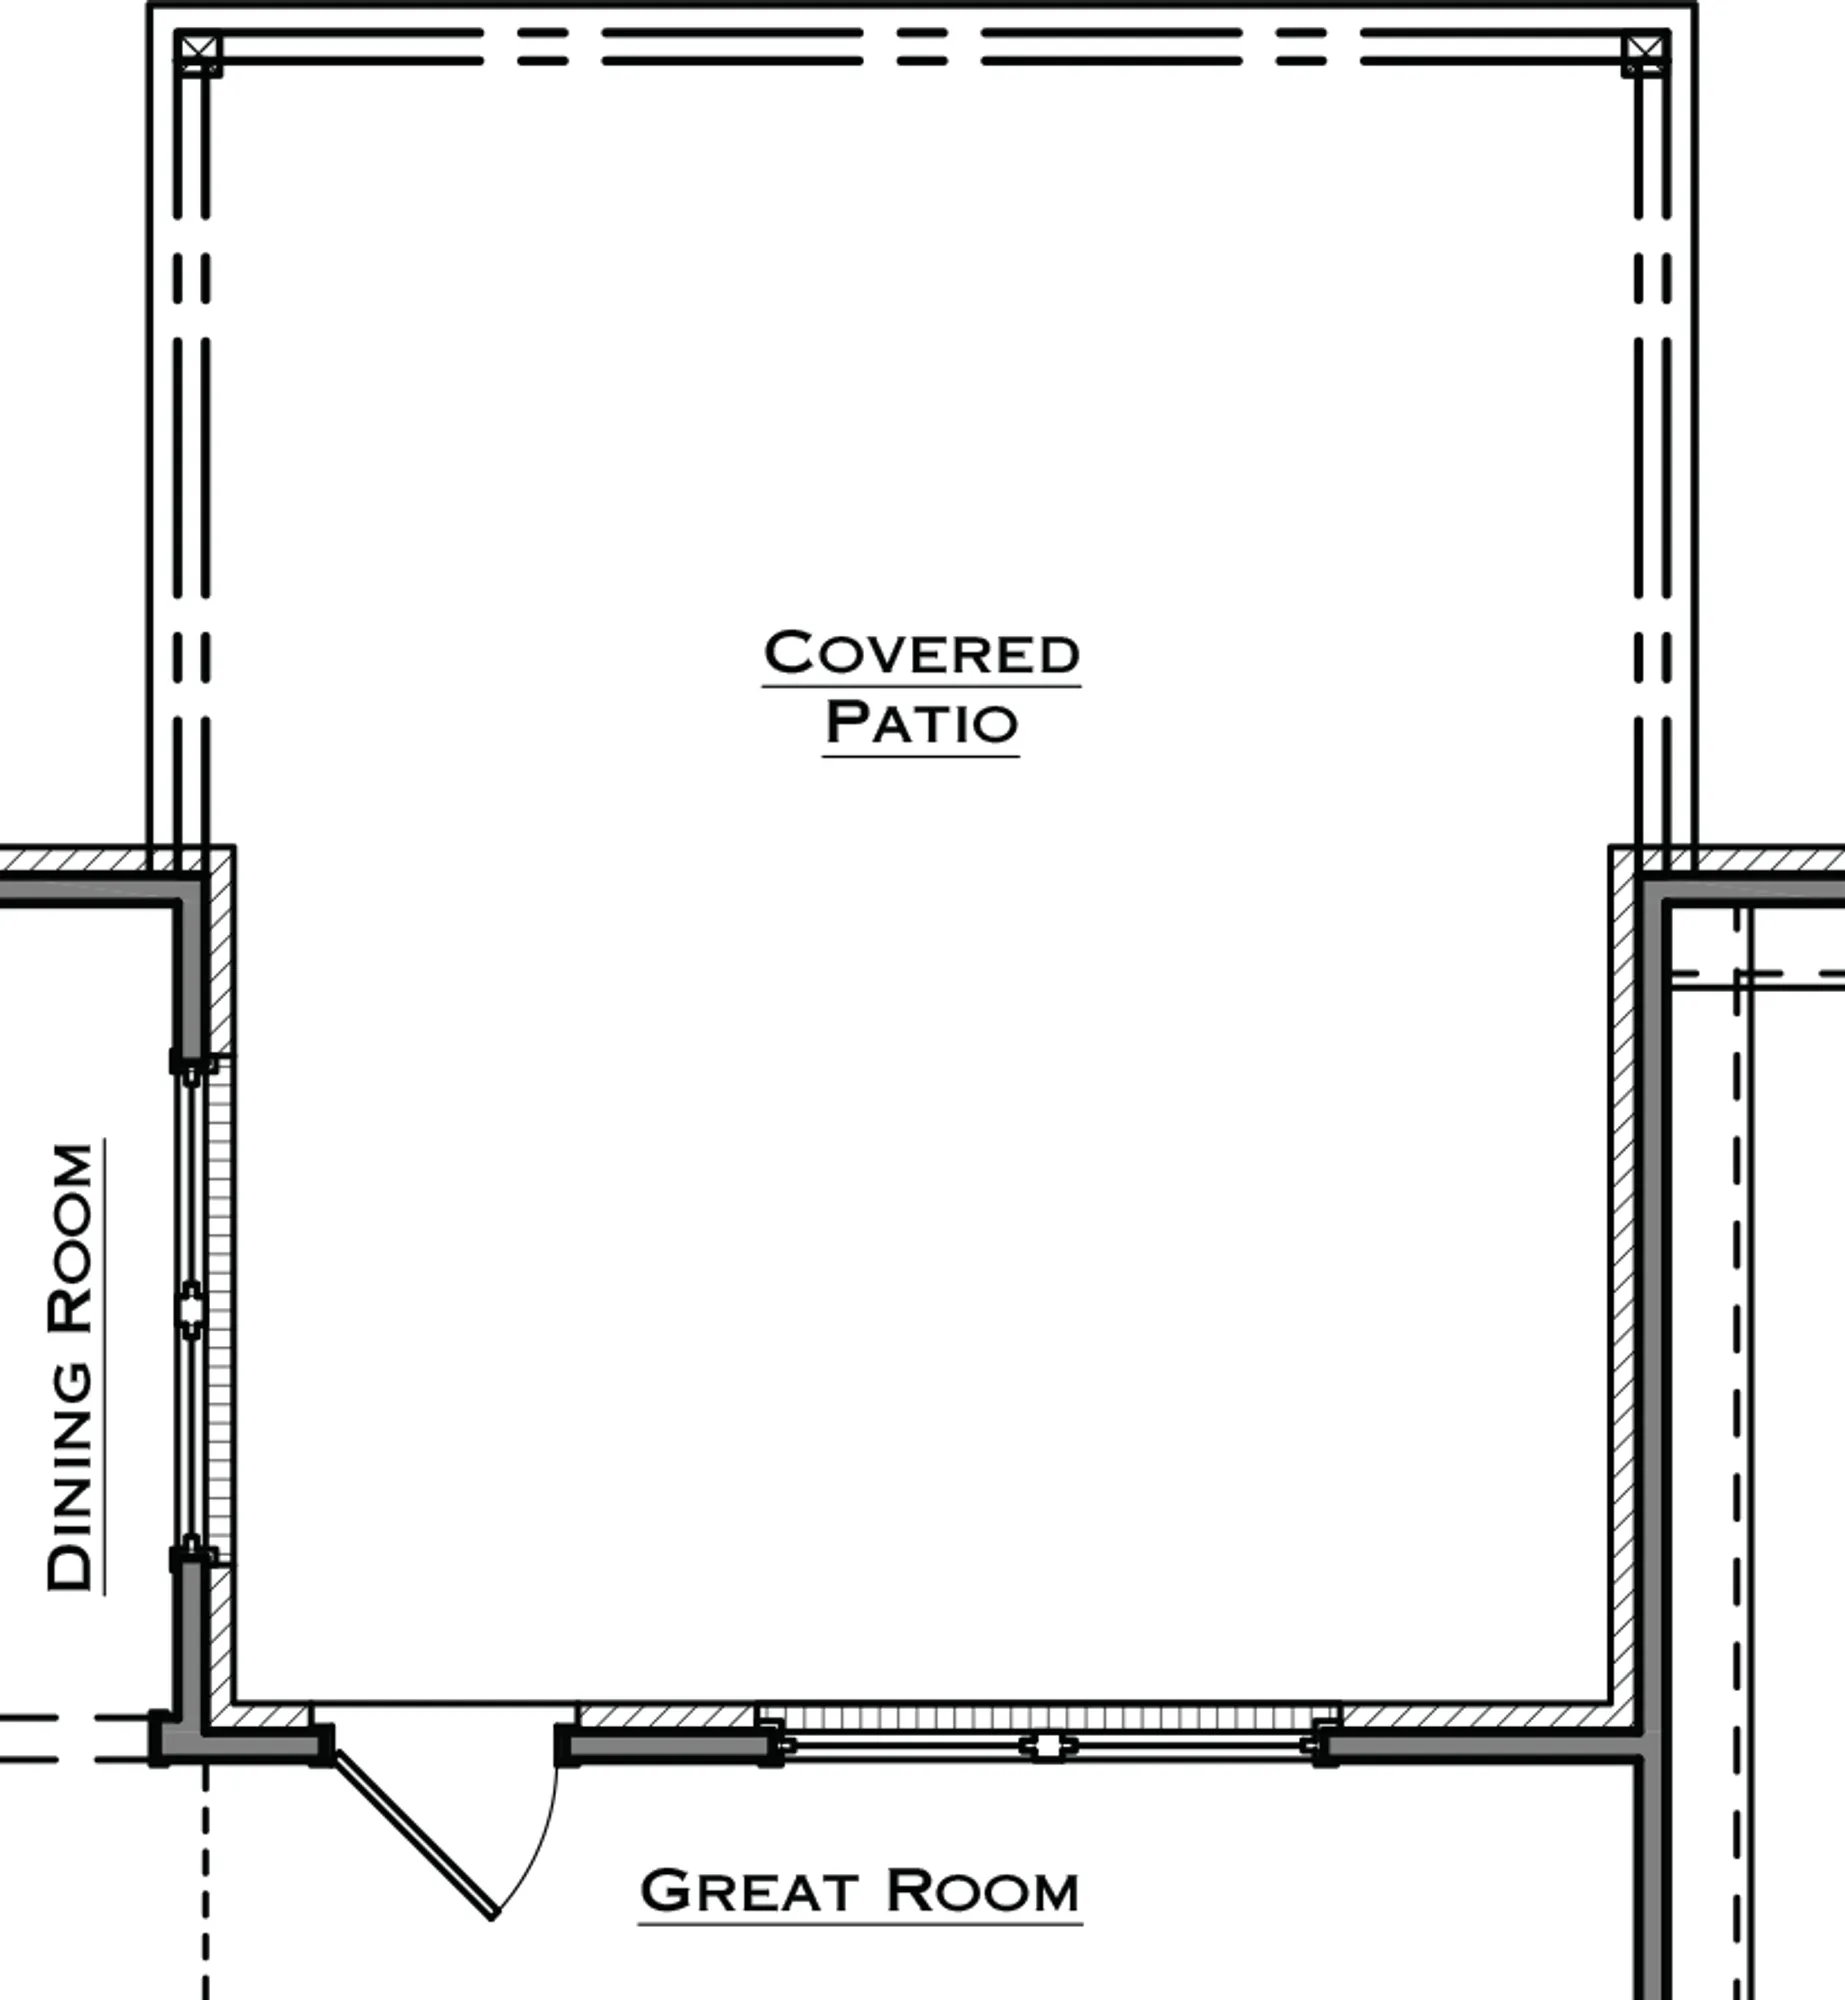 Extended Covered Patio Option - undefined